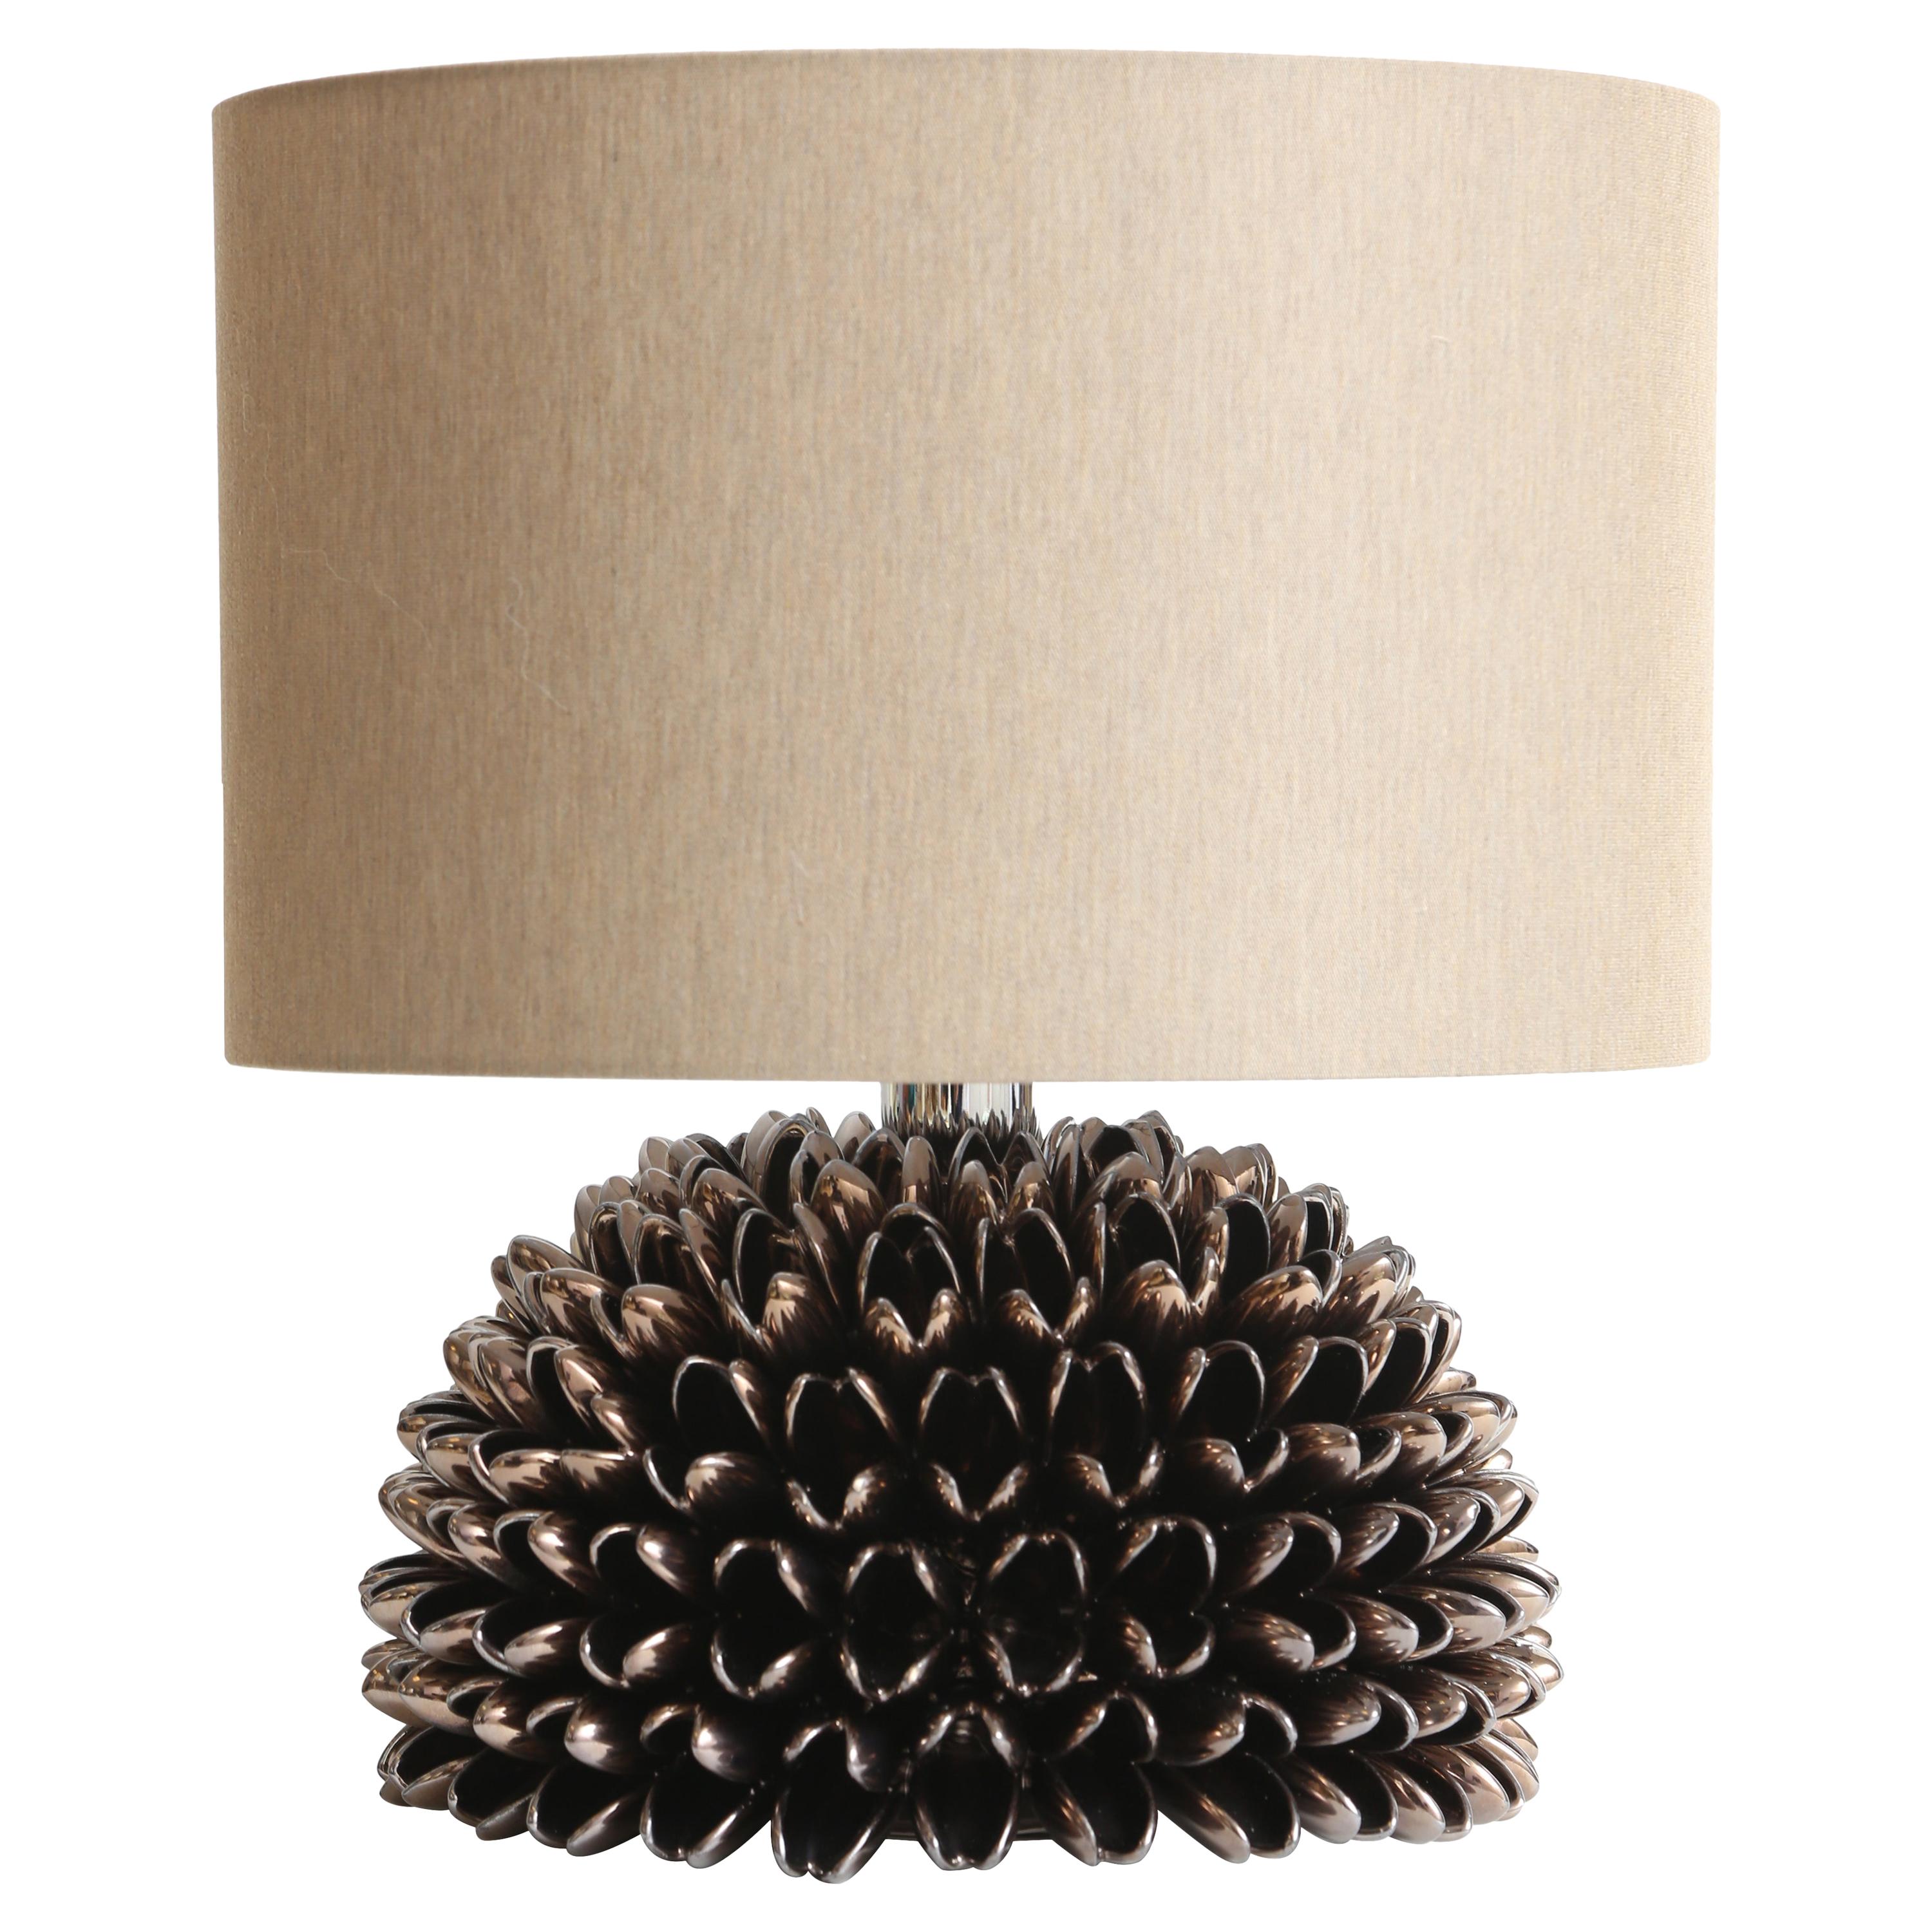 Anemone Table Lamp in Bronze by Riccio Caprese, Made in Italy